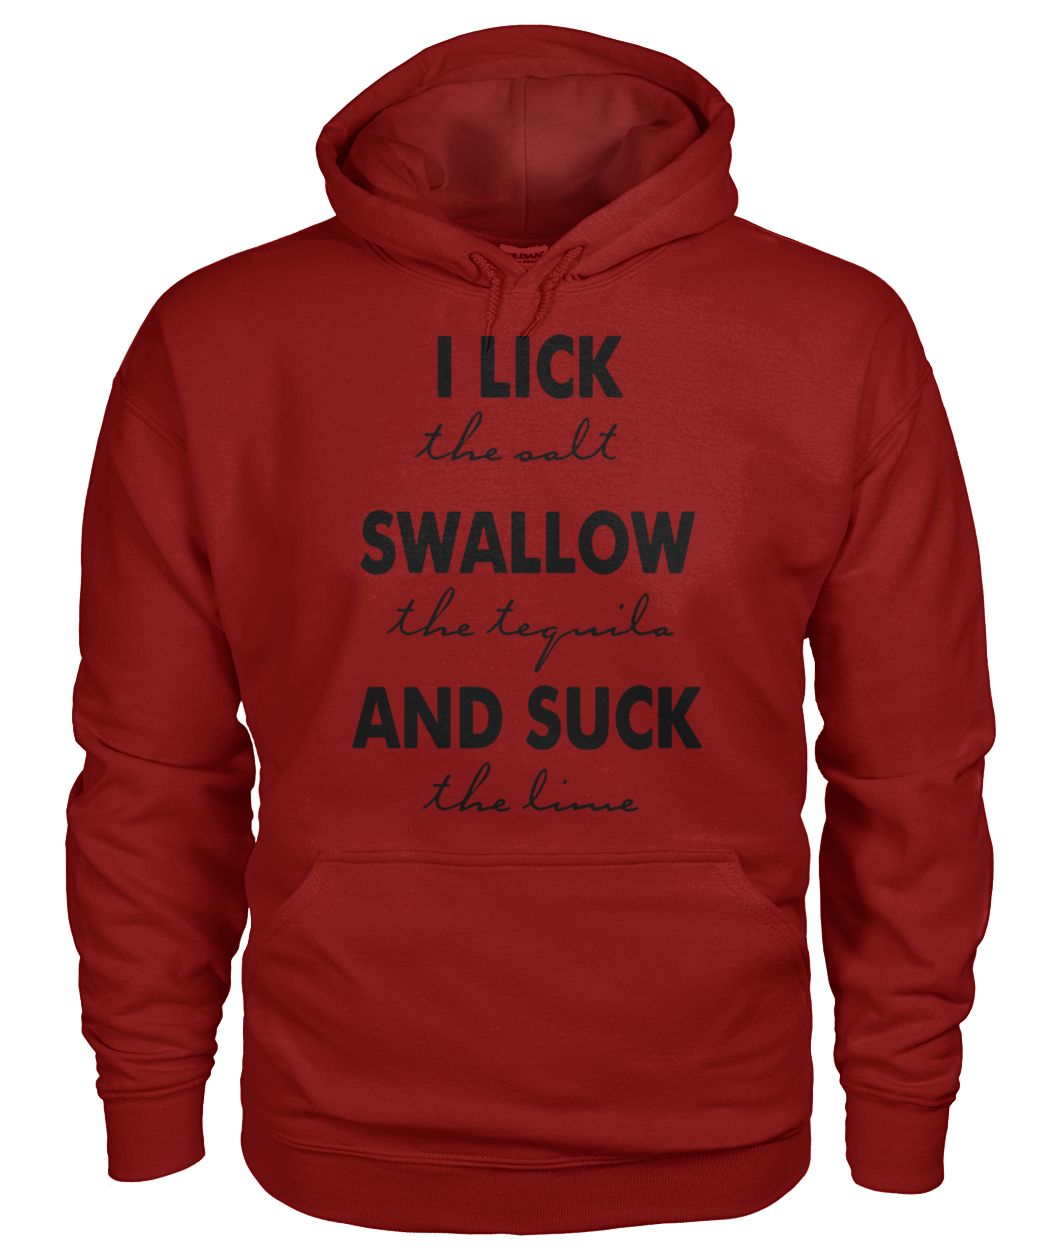 I lick the salt swallow the tequila and suck the lime gildan hoodie